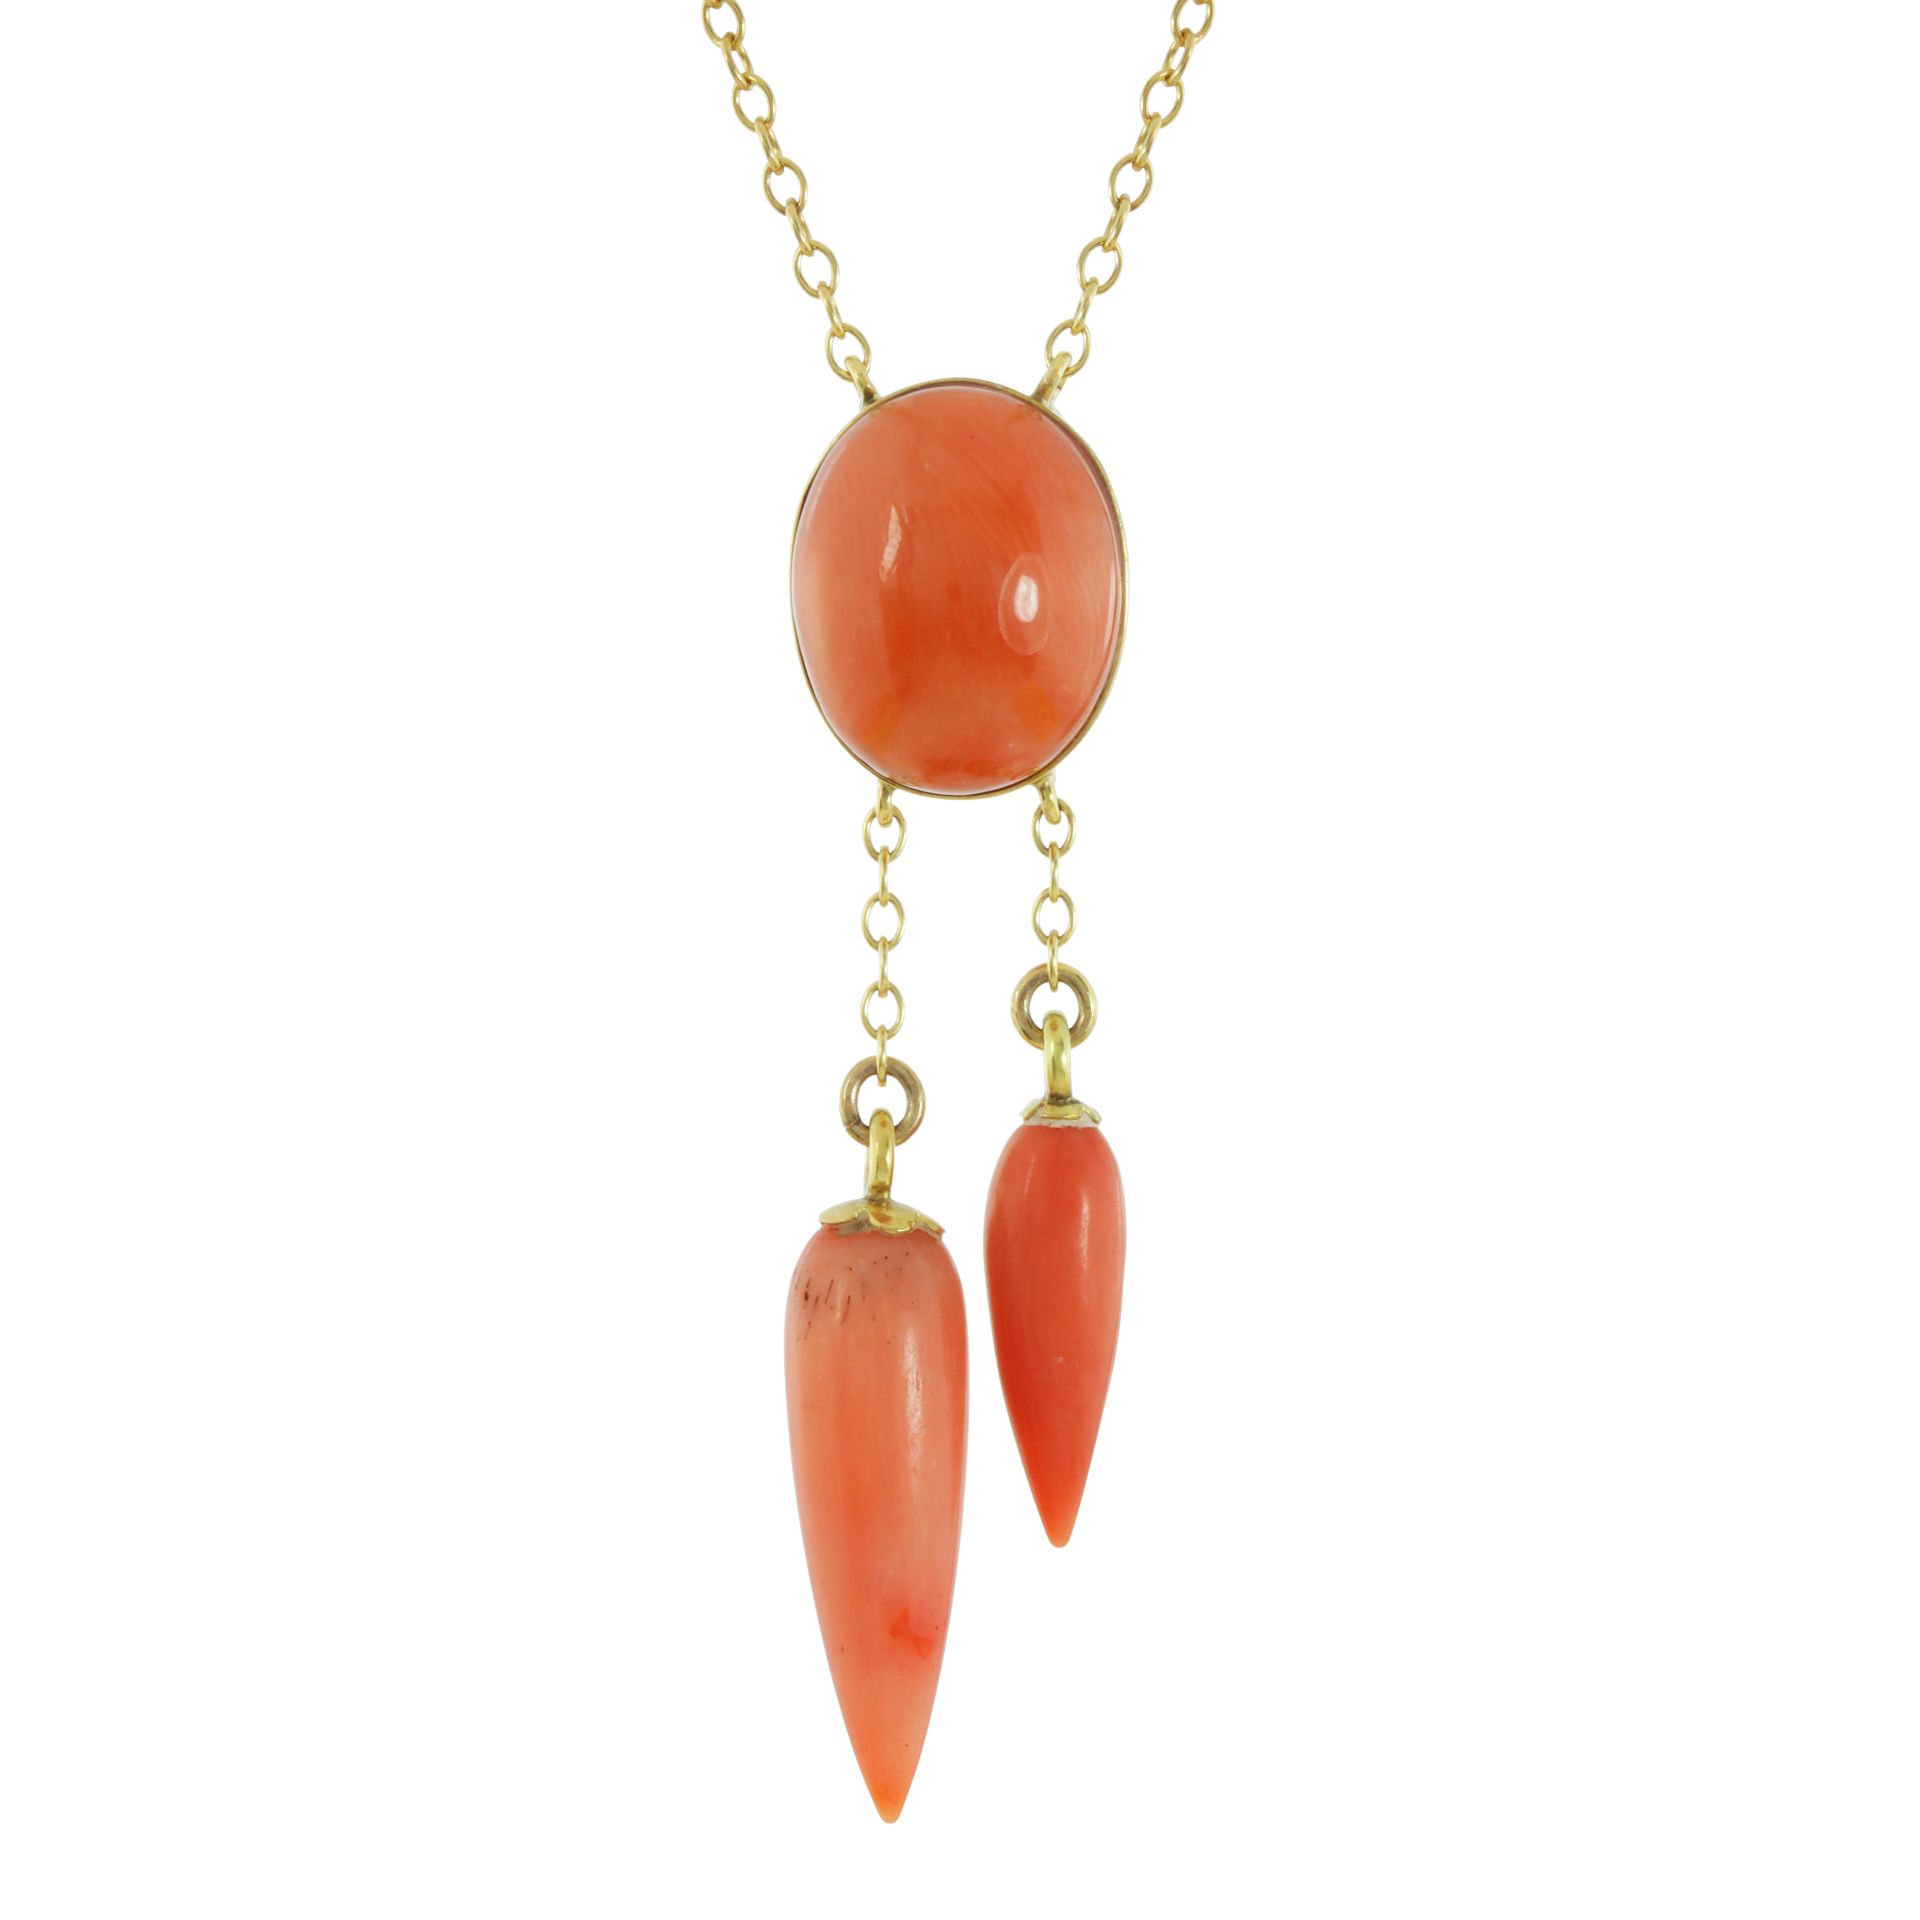 A CORAL LAVALIER PENDANT in yellow gold, set with a central oval coral cabochon suspending two